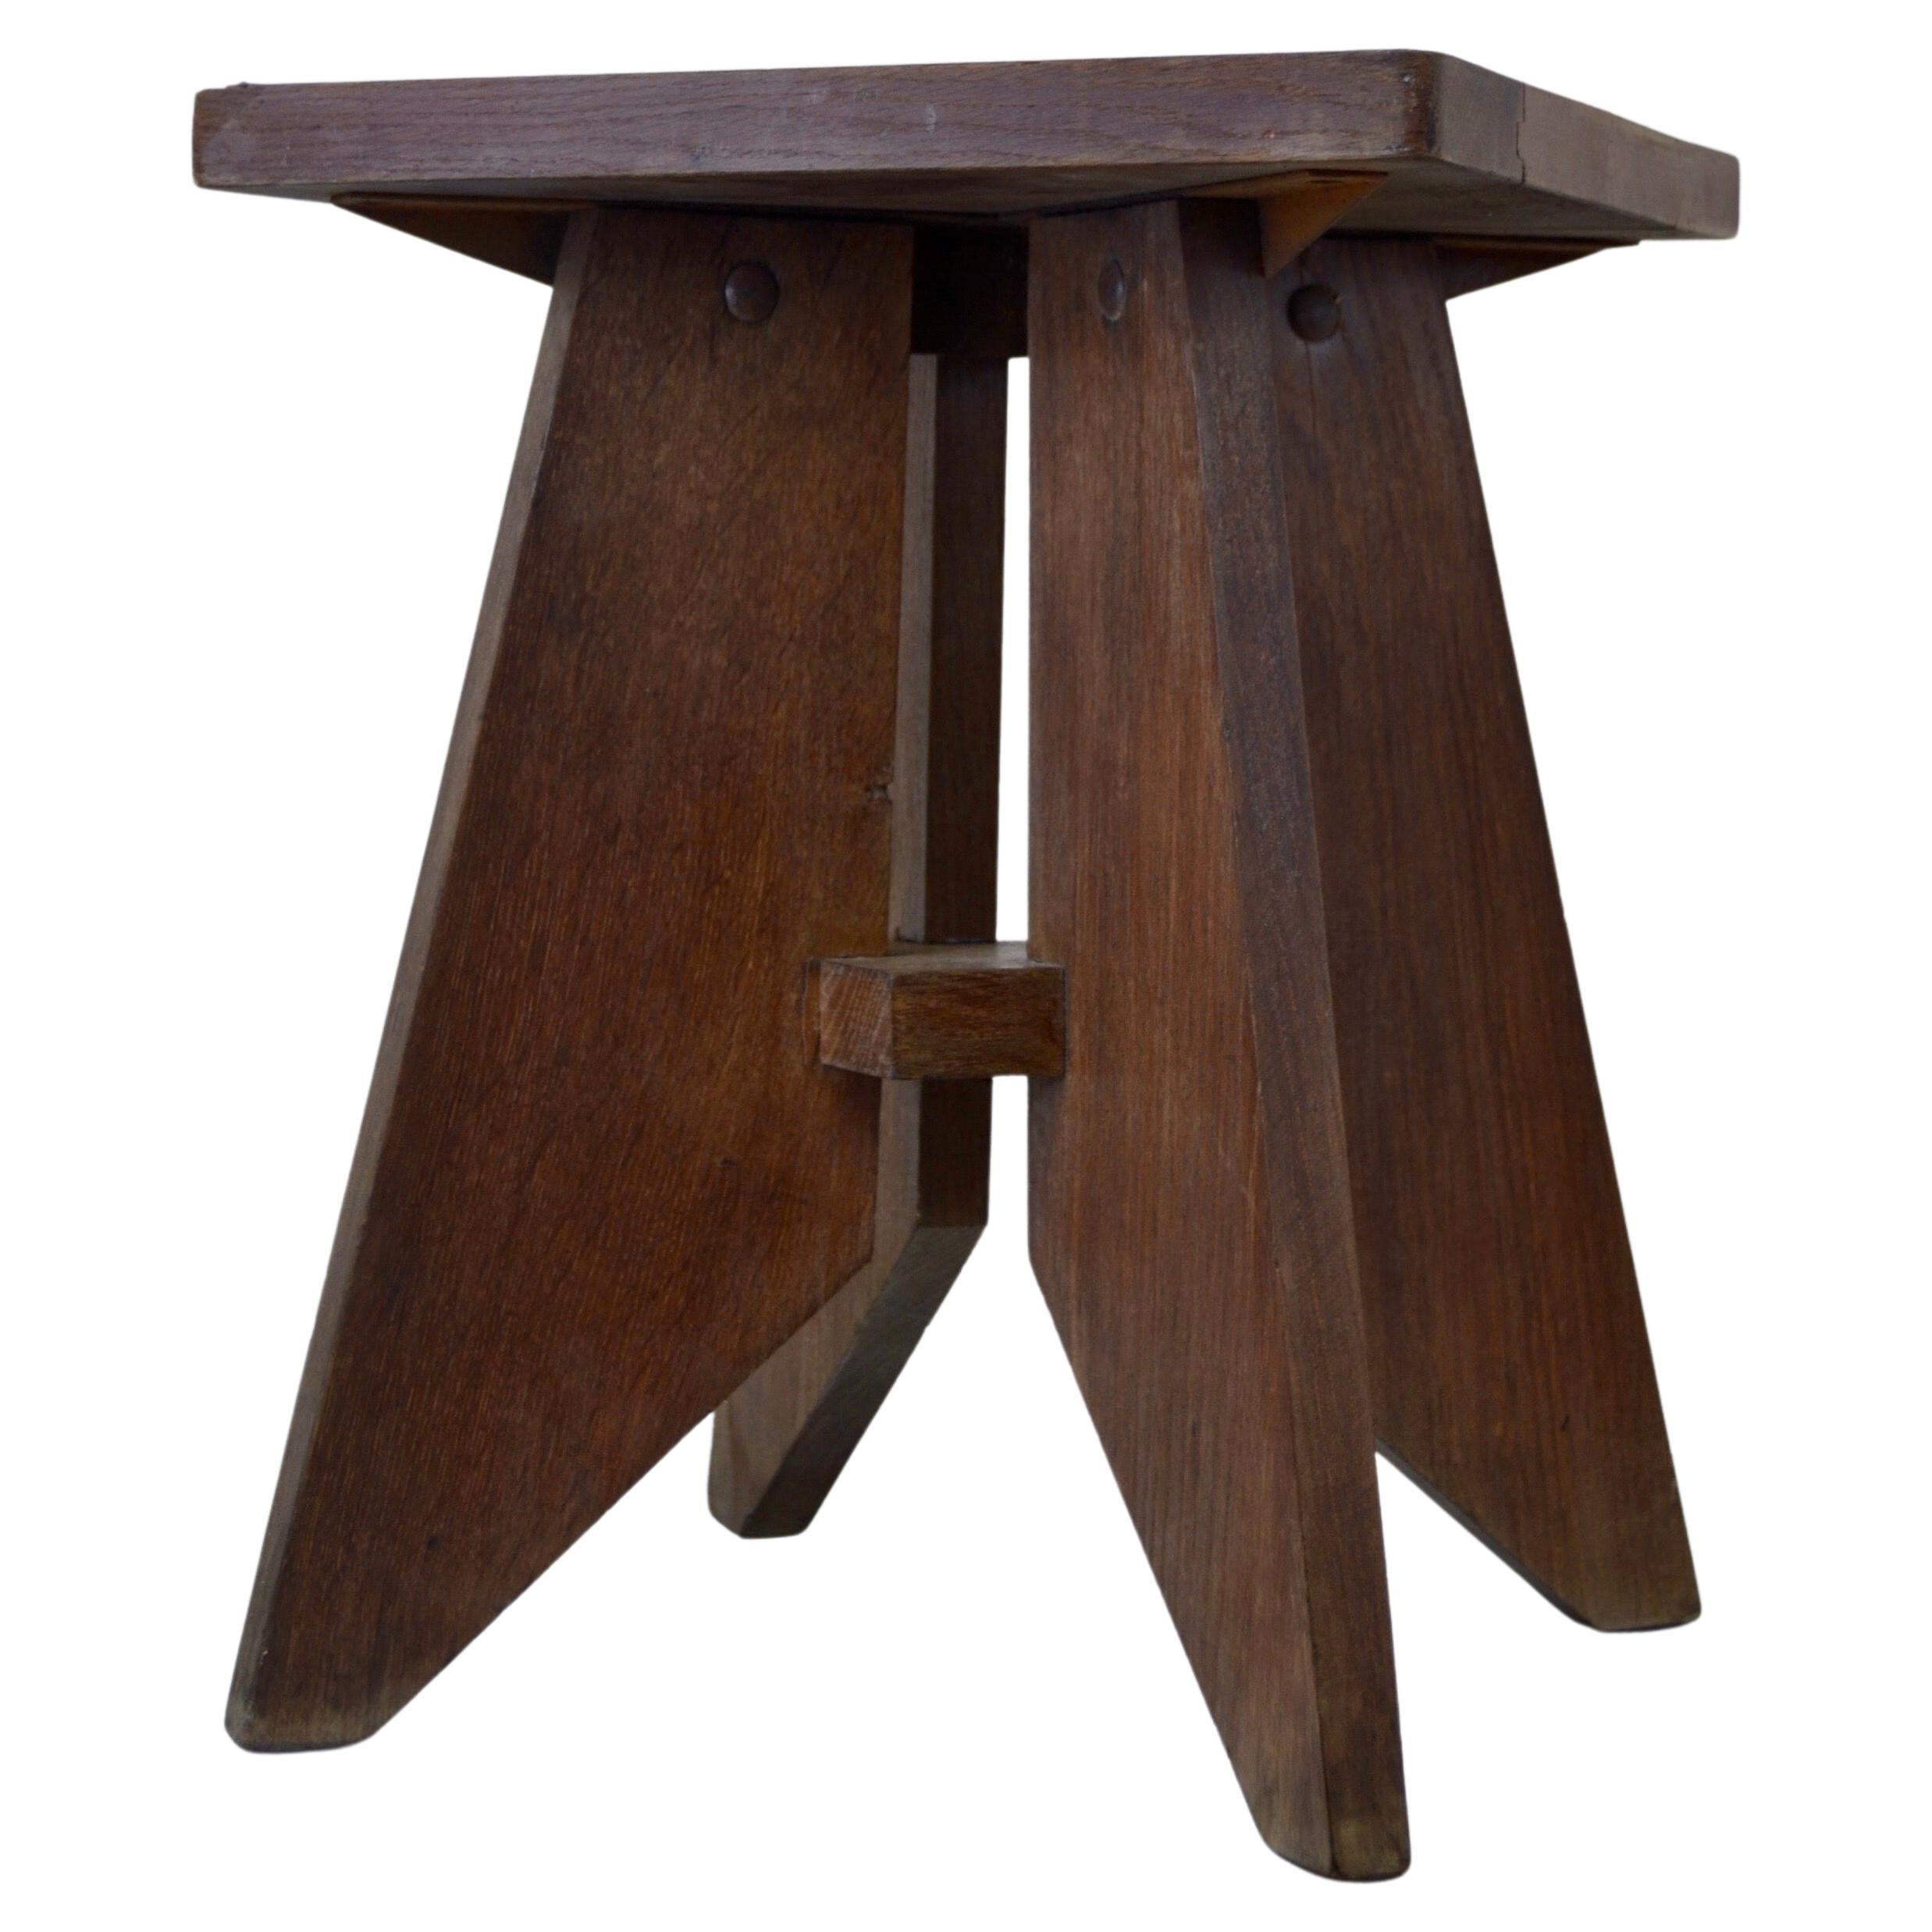 Exceptional Solid Oak Stool from the 1940s - French Manufacture

This stool is a superb illustration of mid-century modern design, inspired by the iconic works of Jean Prouvé, Pierre Jeanneret, and Le Corbusier.

The base is made up of 5 pieces of